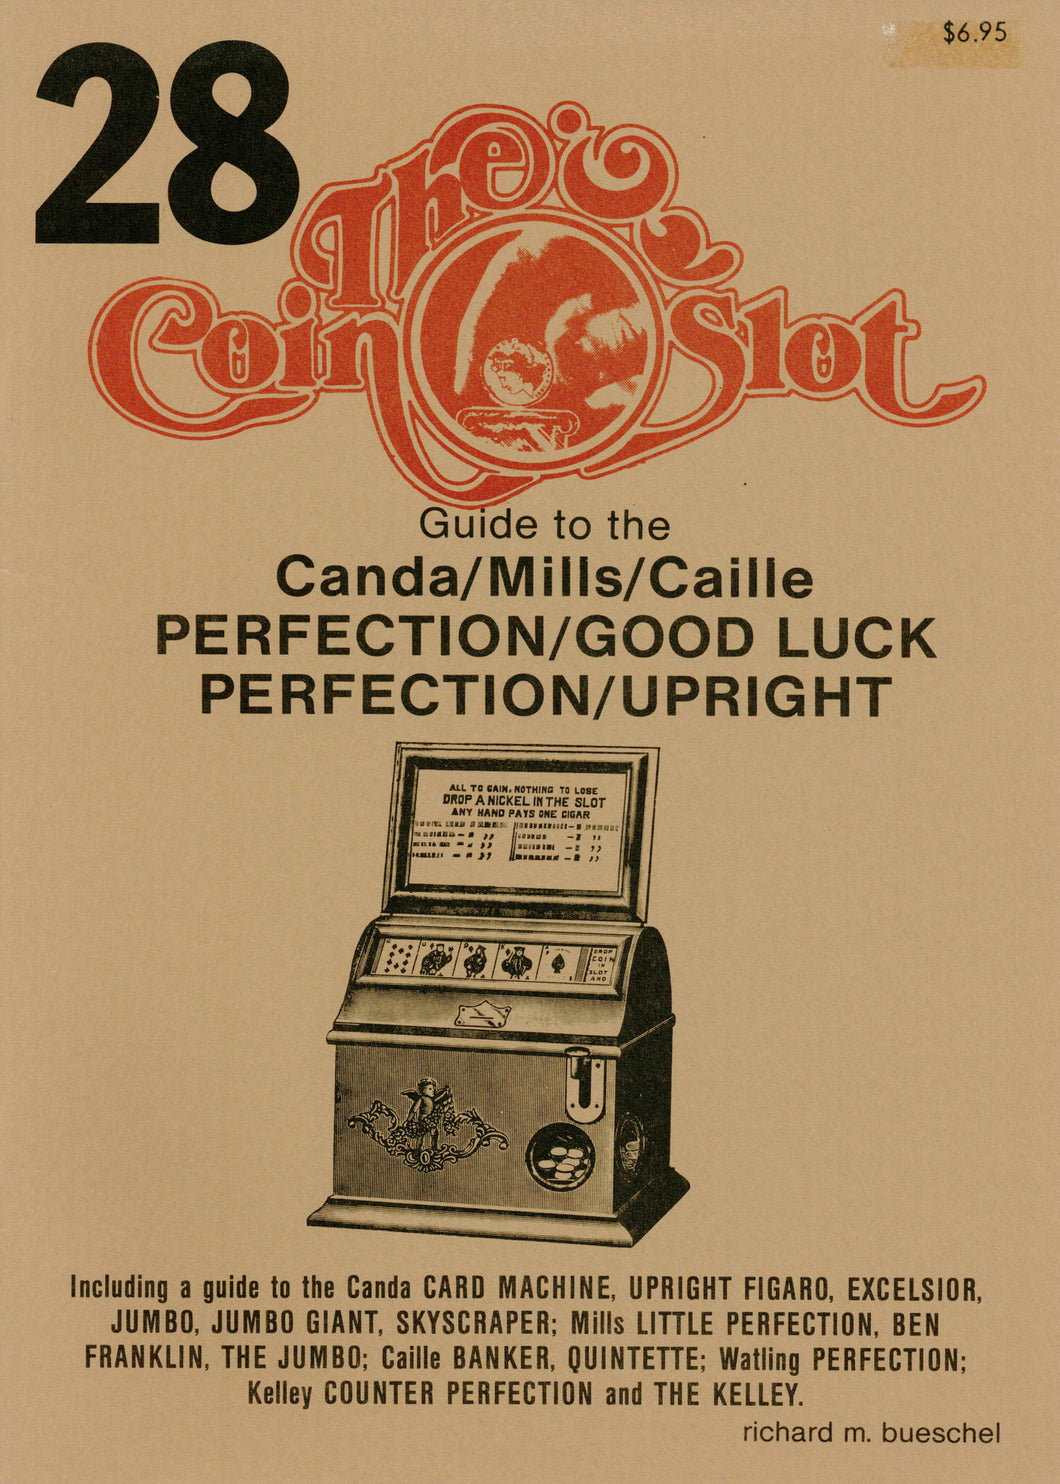 Coin Slot #28. Guide to the Canda/Mills/Caille Perfection/Good Luck Perfection/Upright